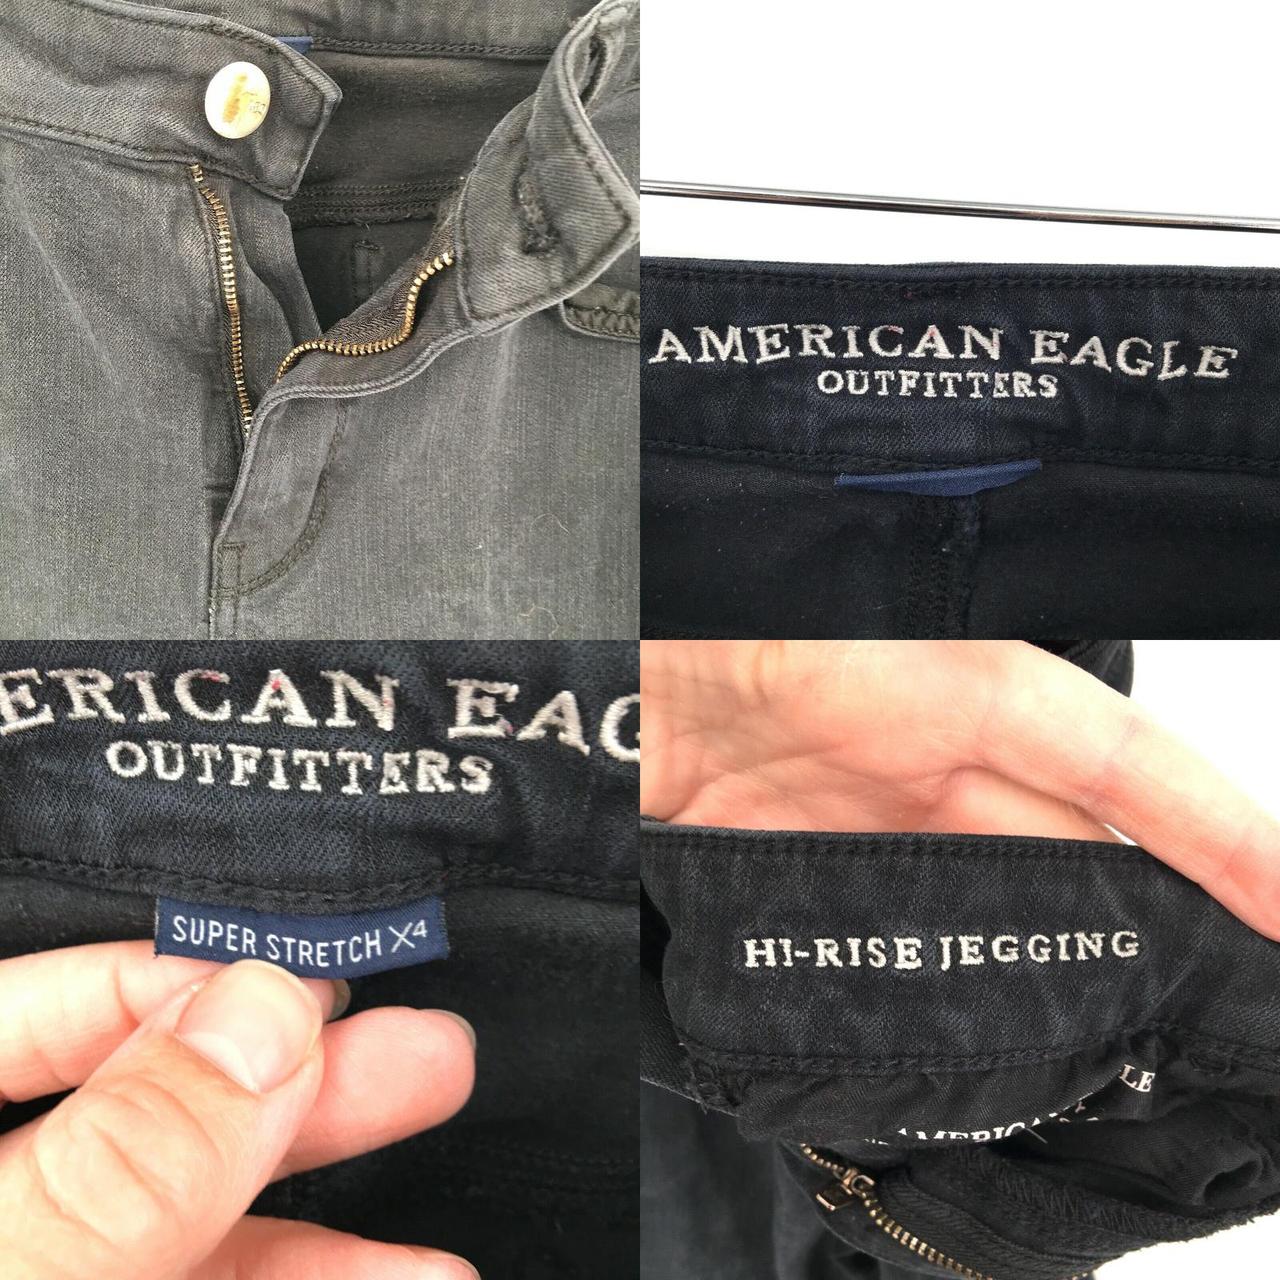 Product Image 4 - American Eagle outfitters AEO Hi-Rise